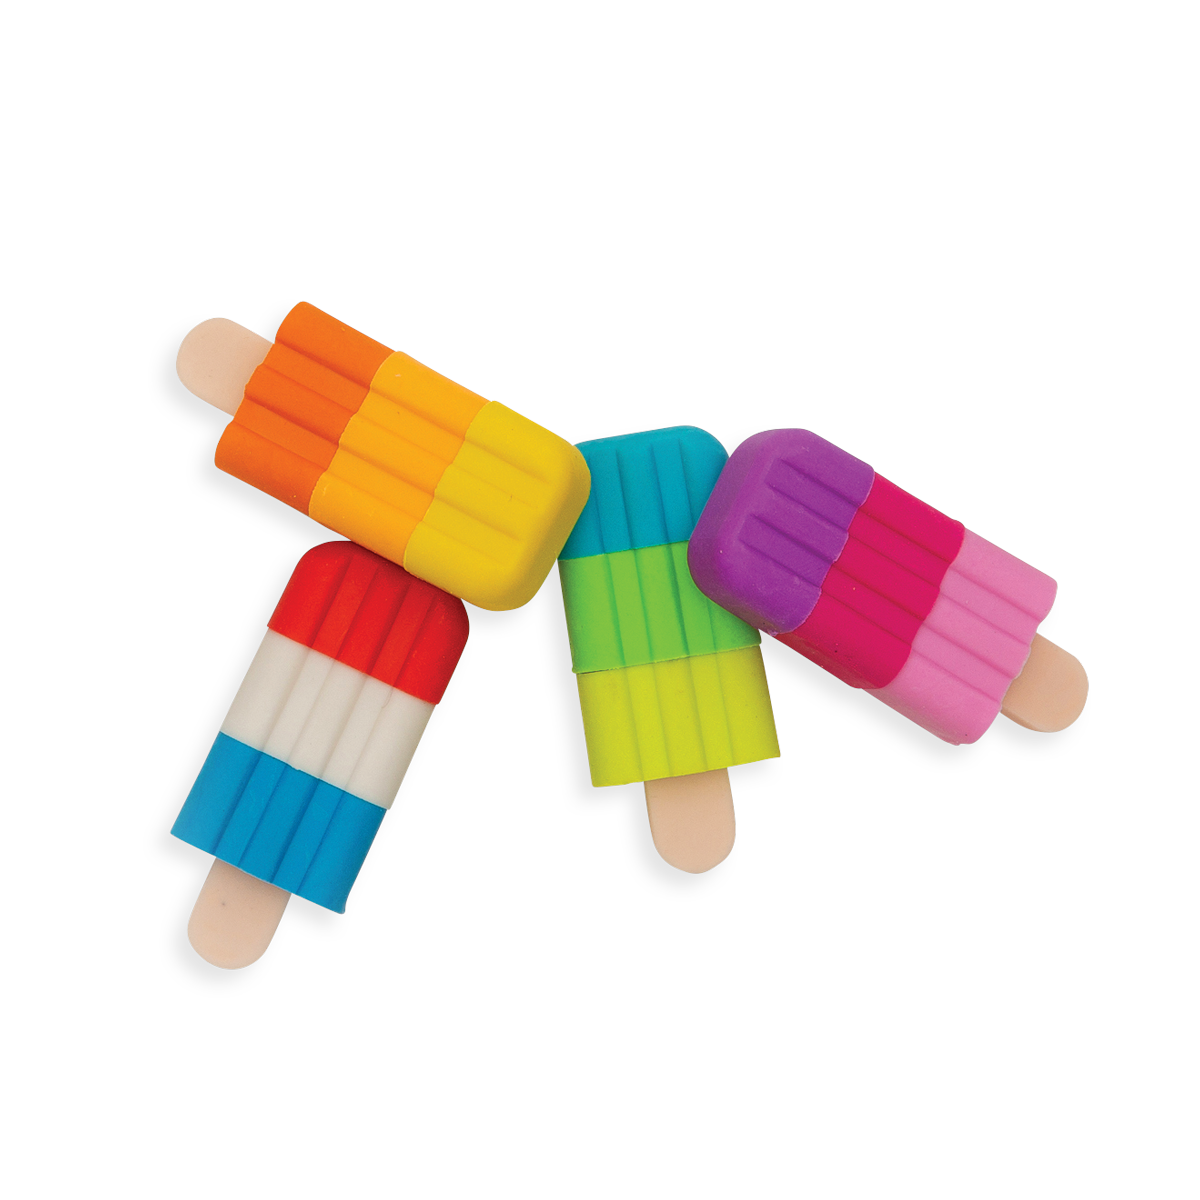 Icy Pops Puzzle Eraser placed with tops touching each other.